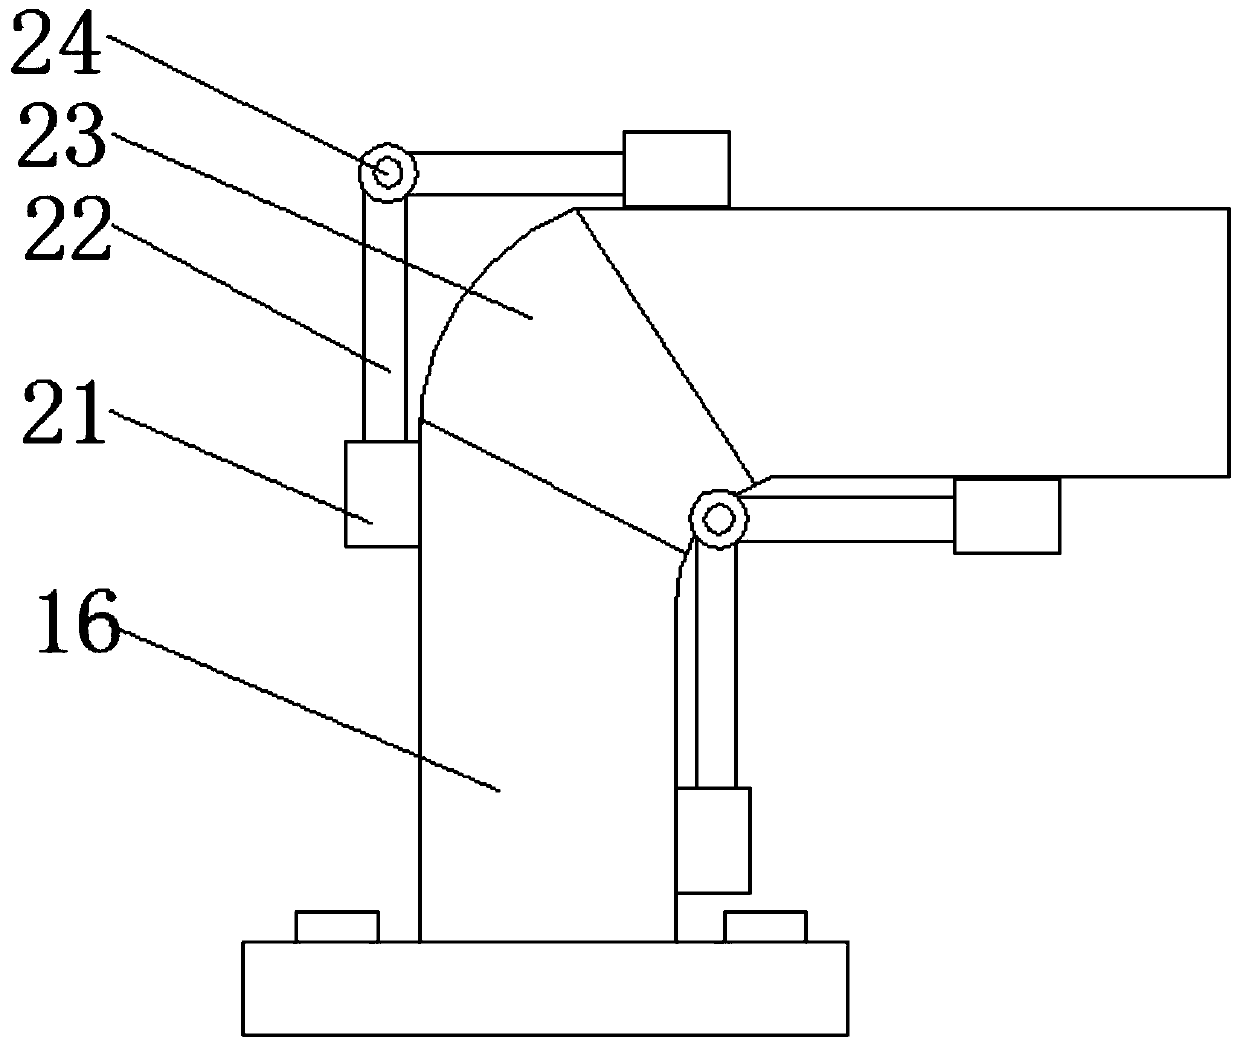 Valve executor with stable mounting structure